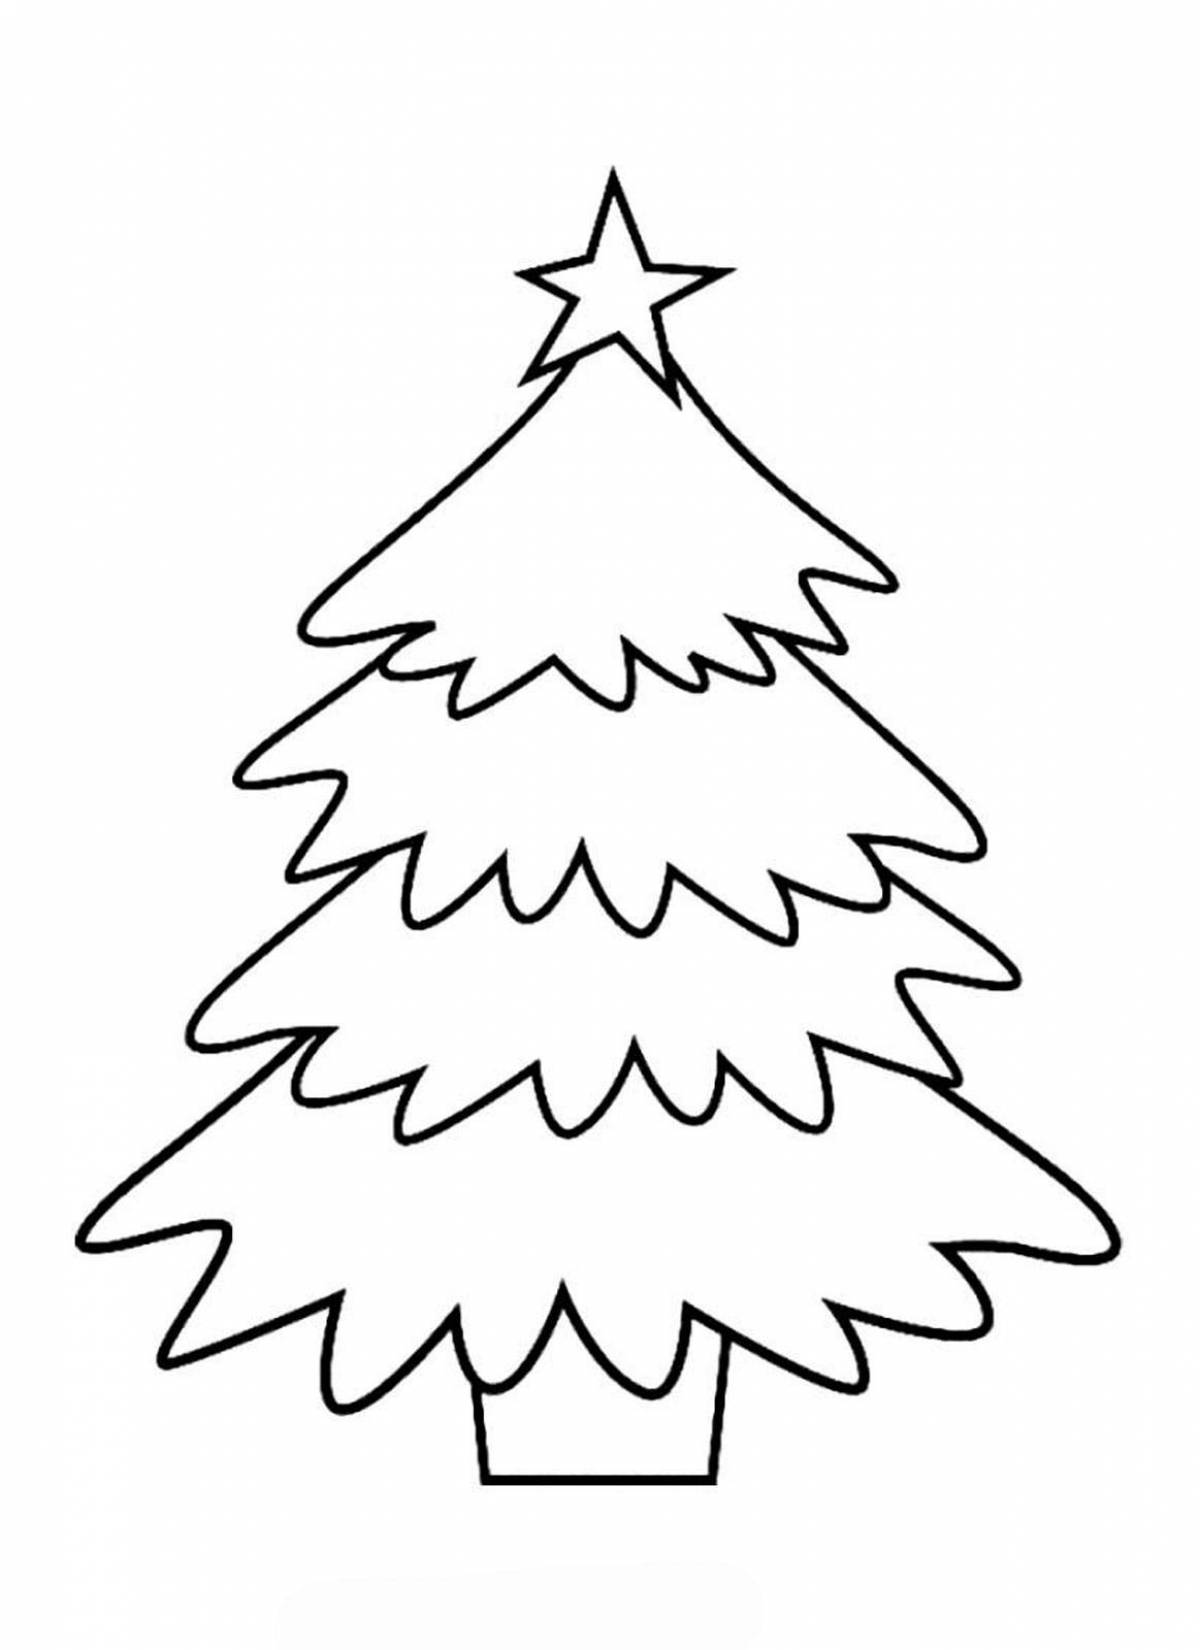 Colorful Christmas tree coloring book for 3-4 year olds